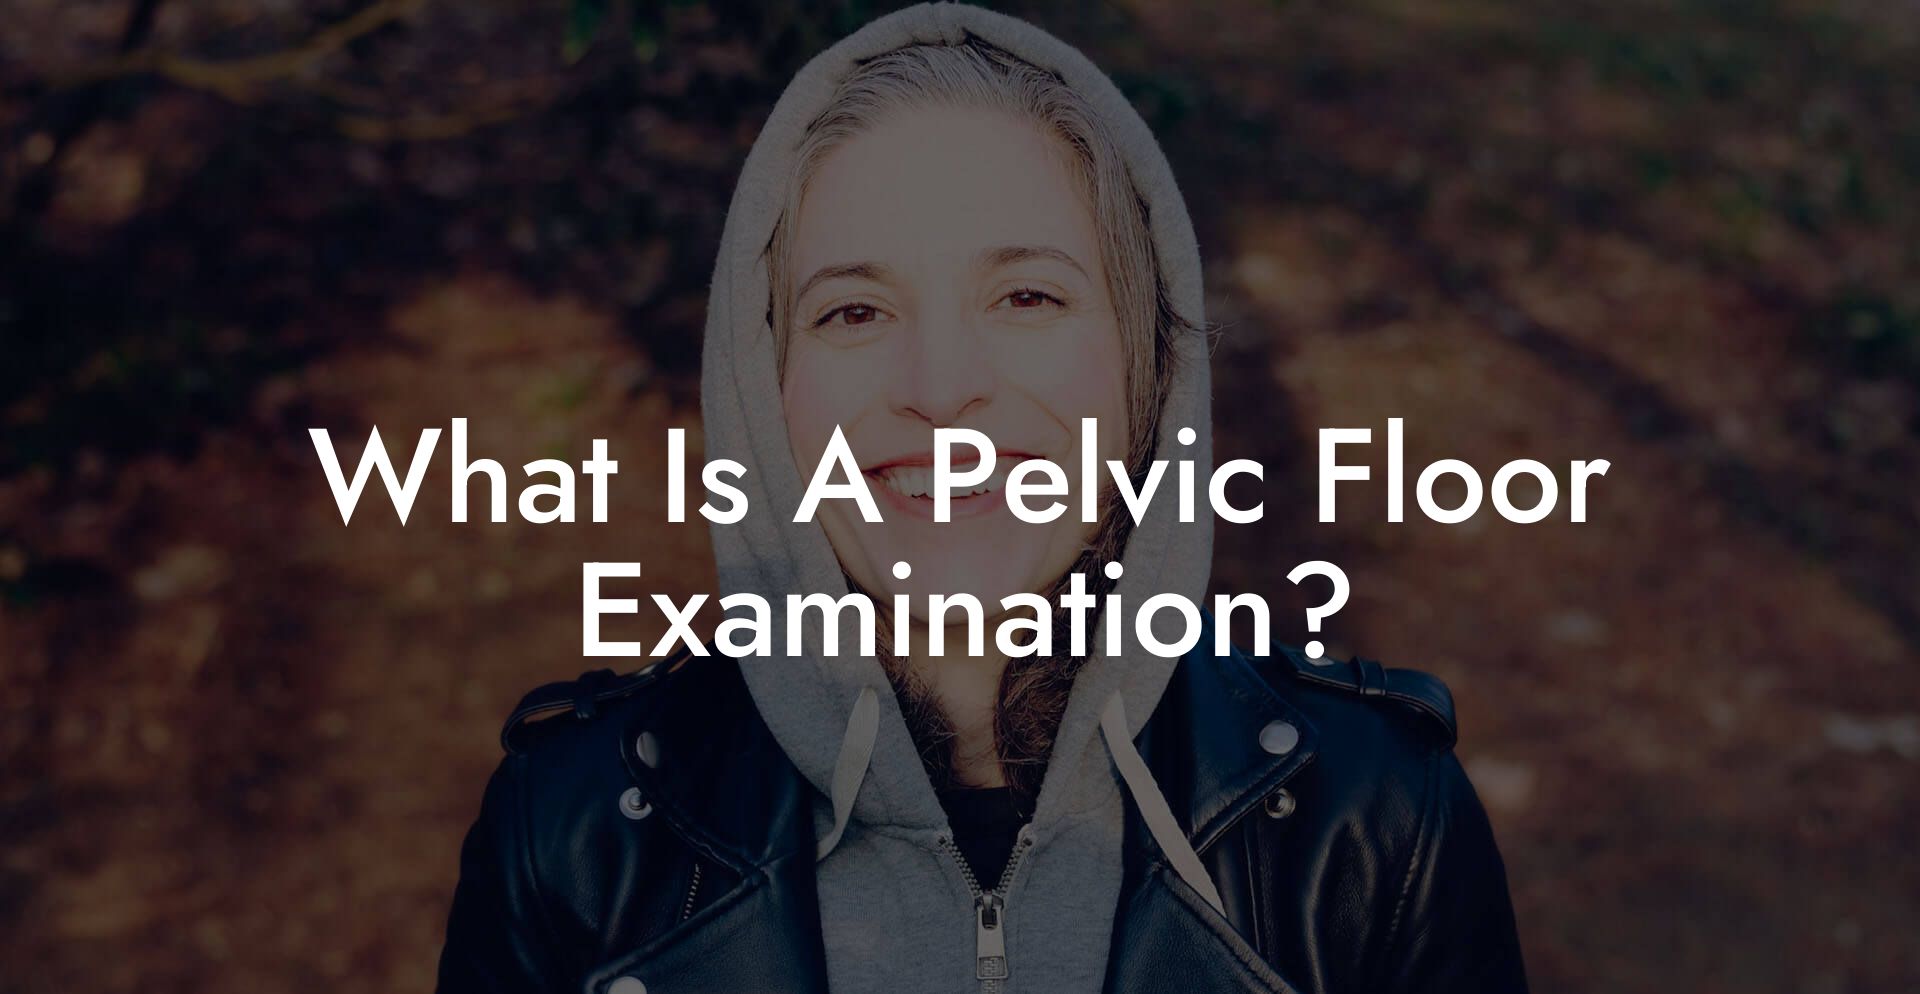 What Is A Pelvic Floor Examination?